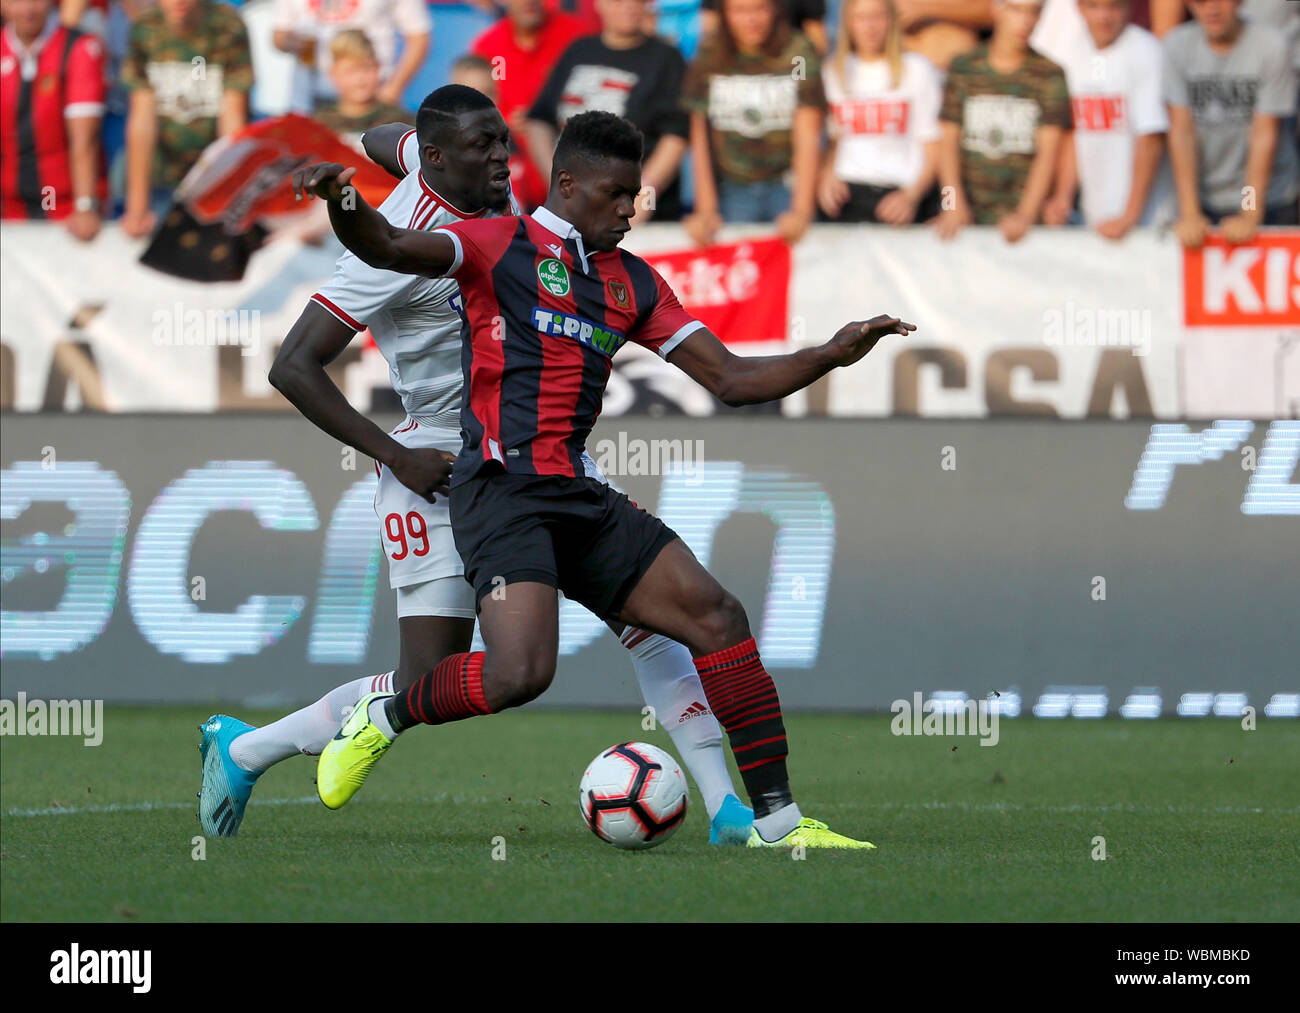 BUDAPEST, HUNGARY - AUGUST 24: (r-l) MacDonald Niba of Budapest Honved covers the ball from Haruna Garba of DVSC during the Hungarian OTP Bank Liga match between Budapest Honved and DVSC at Nandor Hidegkuti Stadium on August 24, 2019 in Budapest, Hungary. Stock Photo